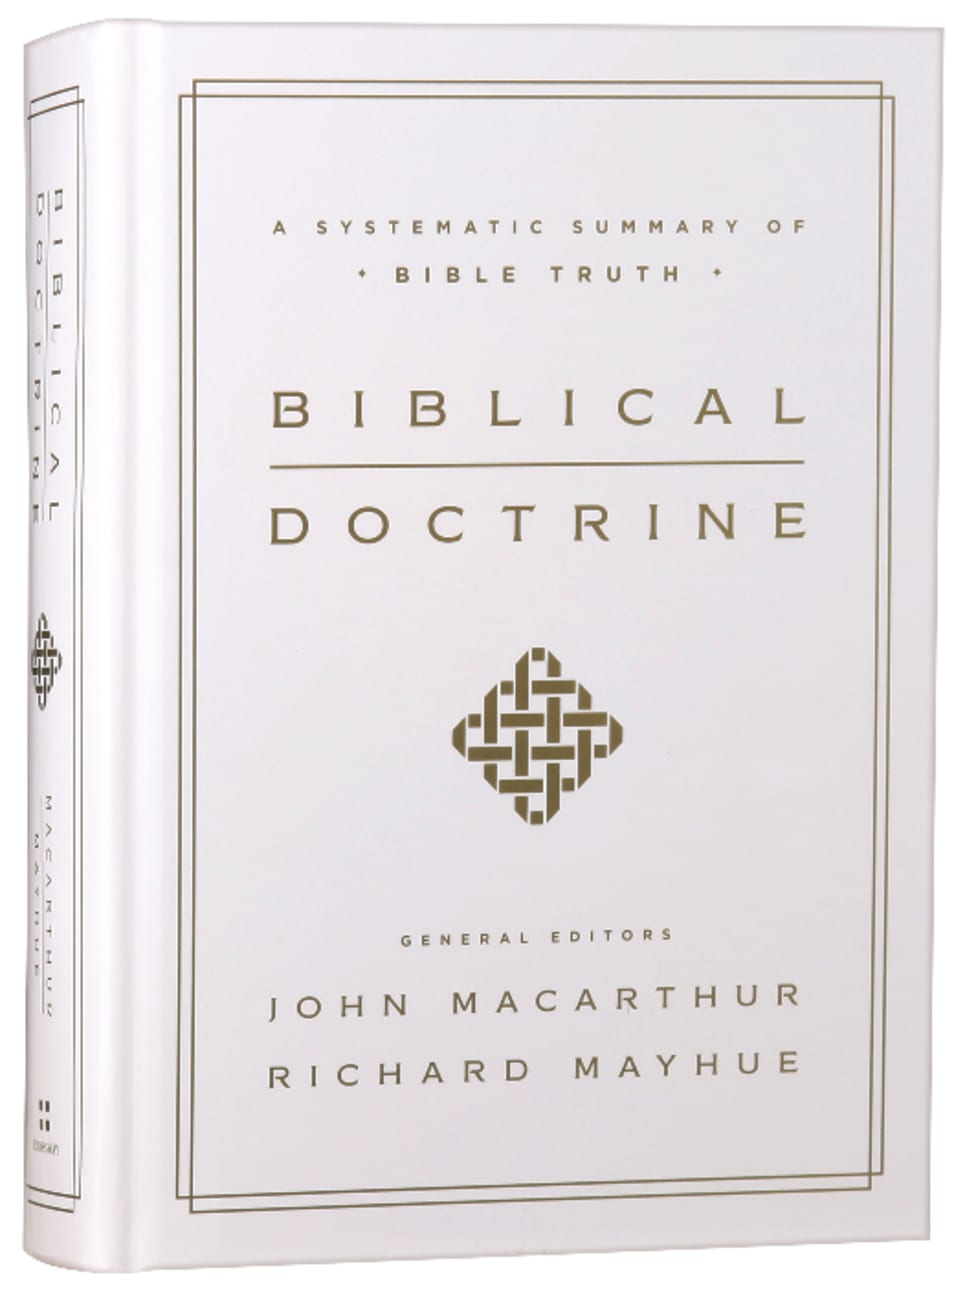 Biblical Doctrine: A Systematic Summary of Bible Truth Hardback